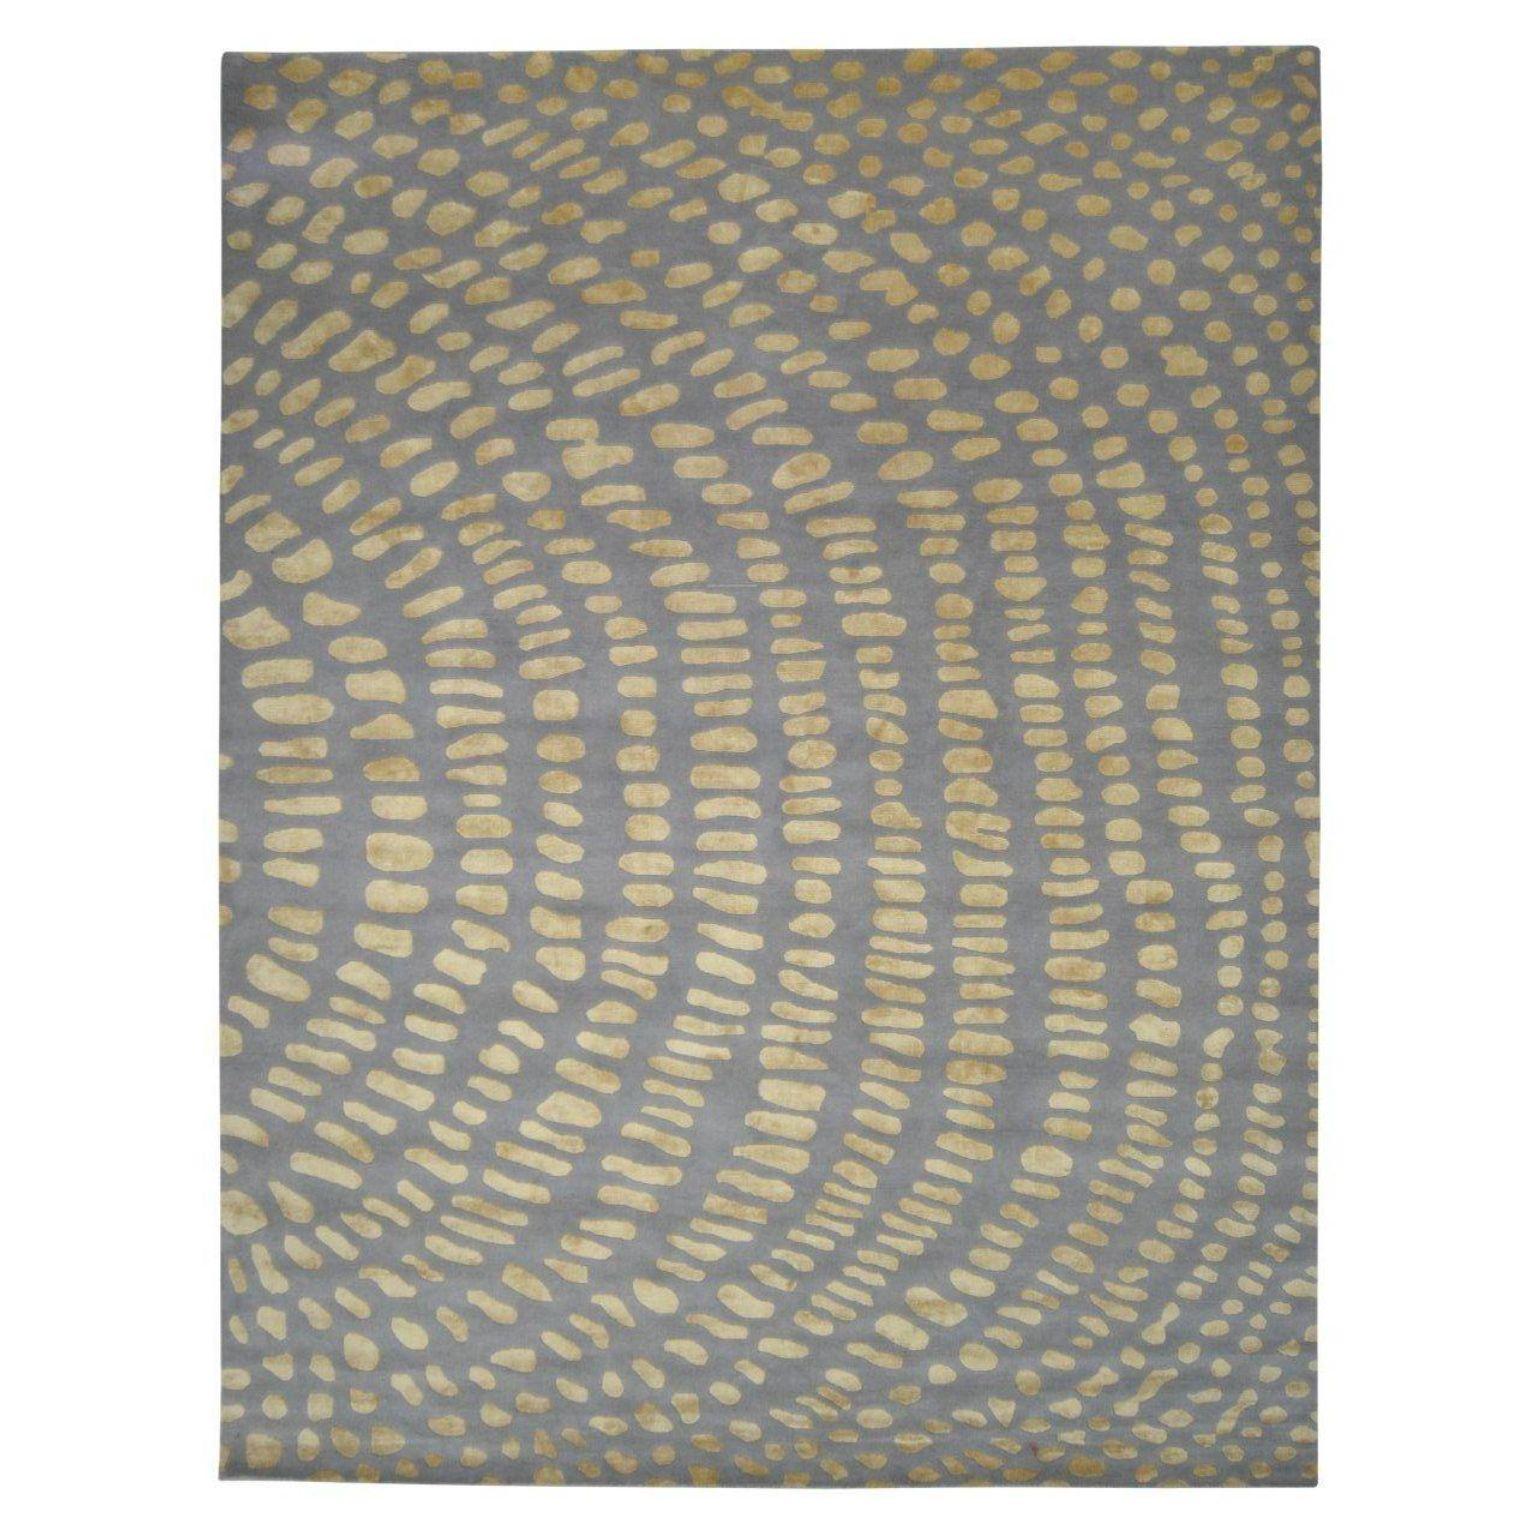 Aboriginal scales large rug by Art & Loom
Dimensions: D304.8 x H426.7 cm
Materials: New Zealand wool with, Chinese silk—single pile height
Also available in different dimensions.

Samantha Gallacher has always had a keen eye for aesthetics,